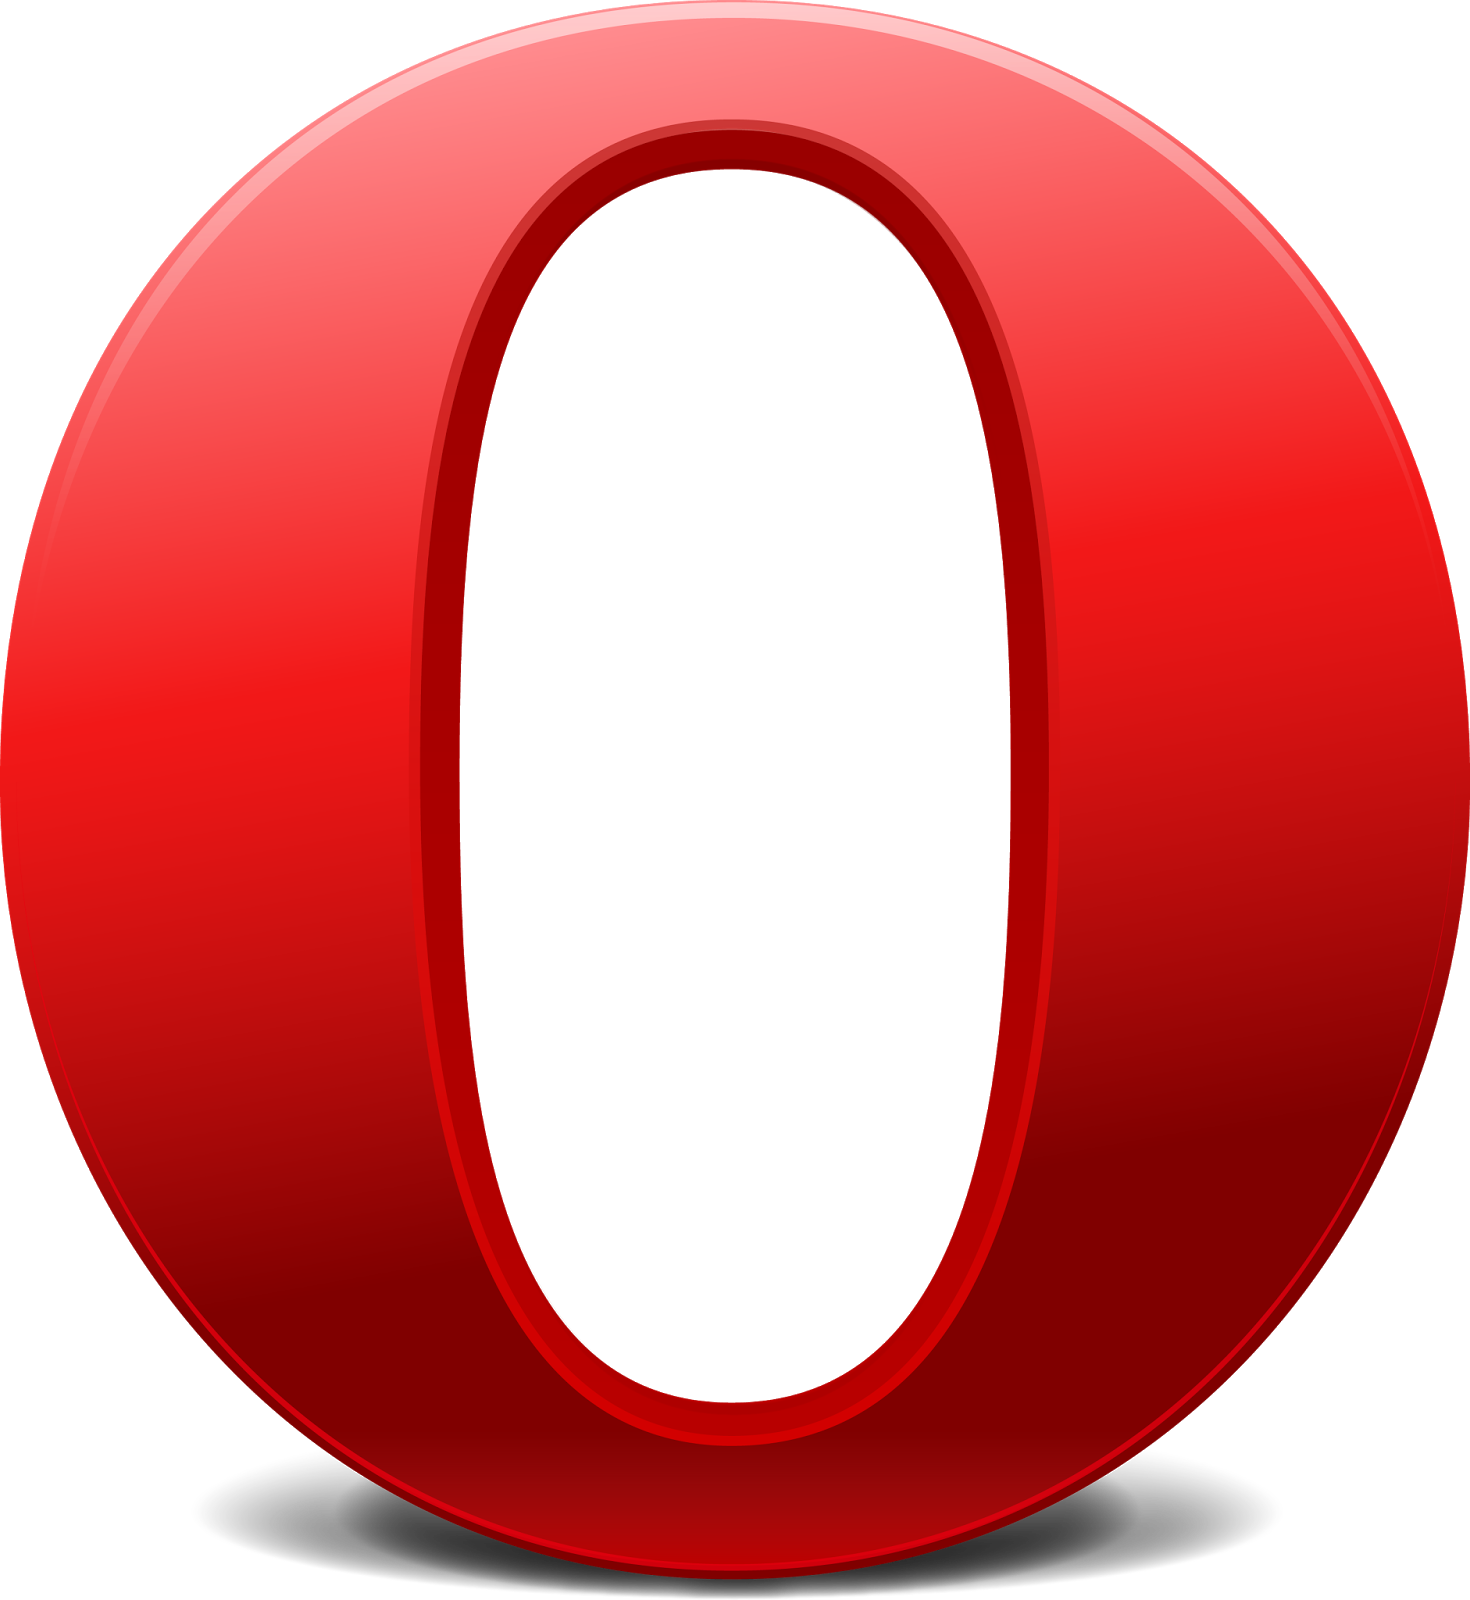 Download opera 36 for windows xp